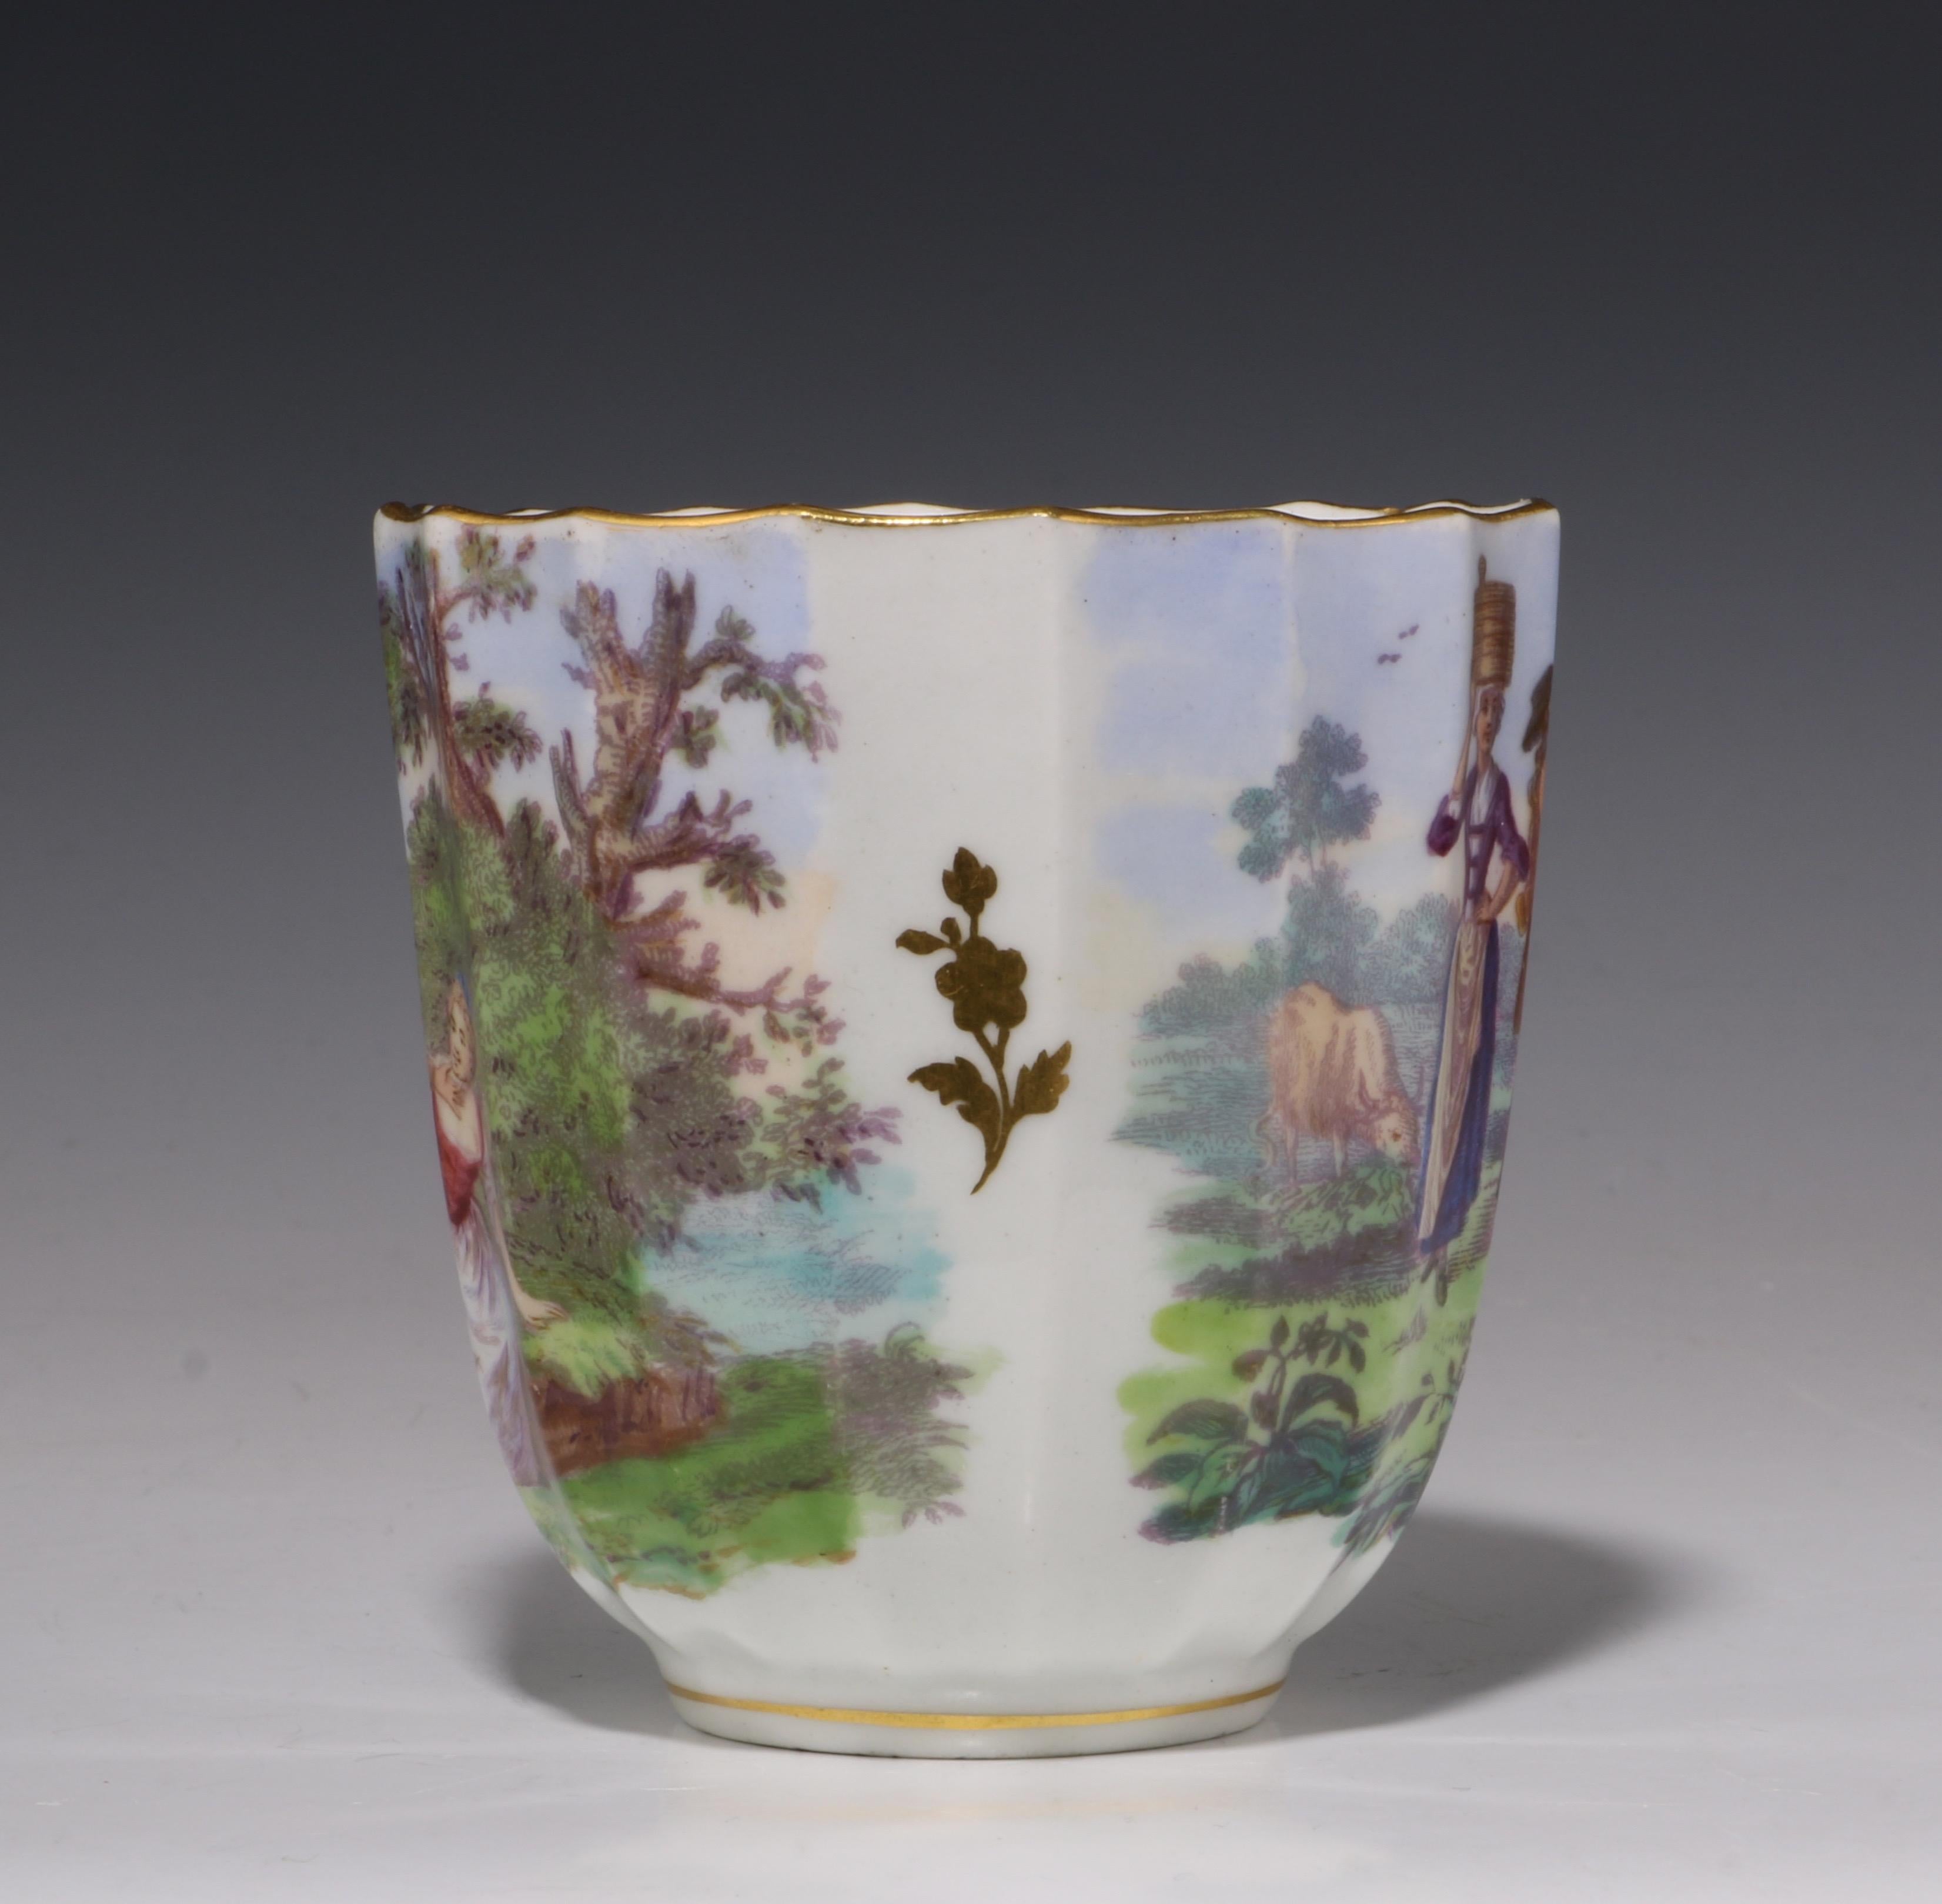 Porcelain English Worcester Onglaze Printed and Enamelled Cup and Saucer, circa 1770 For Sale